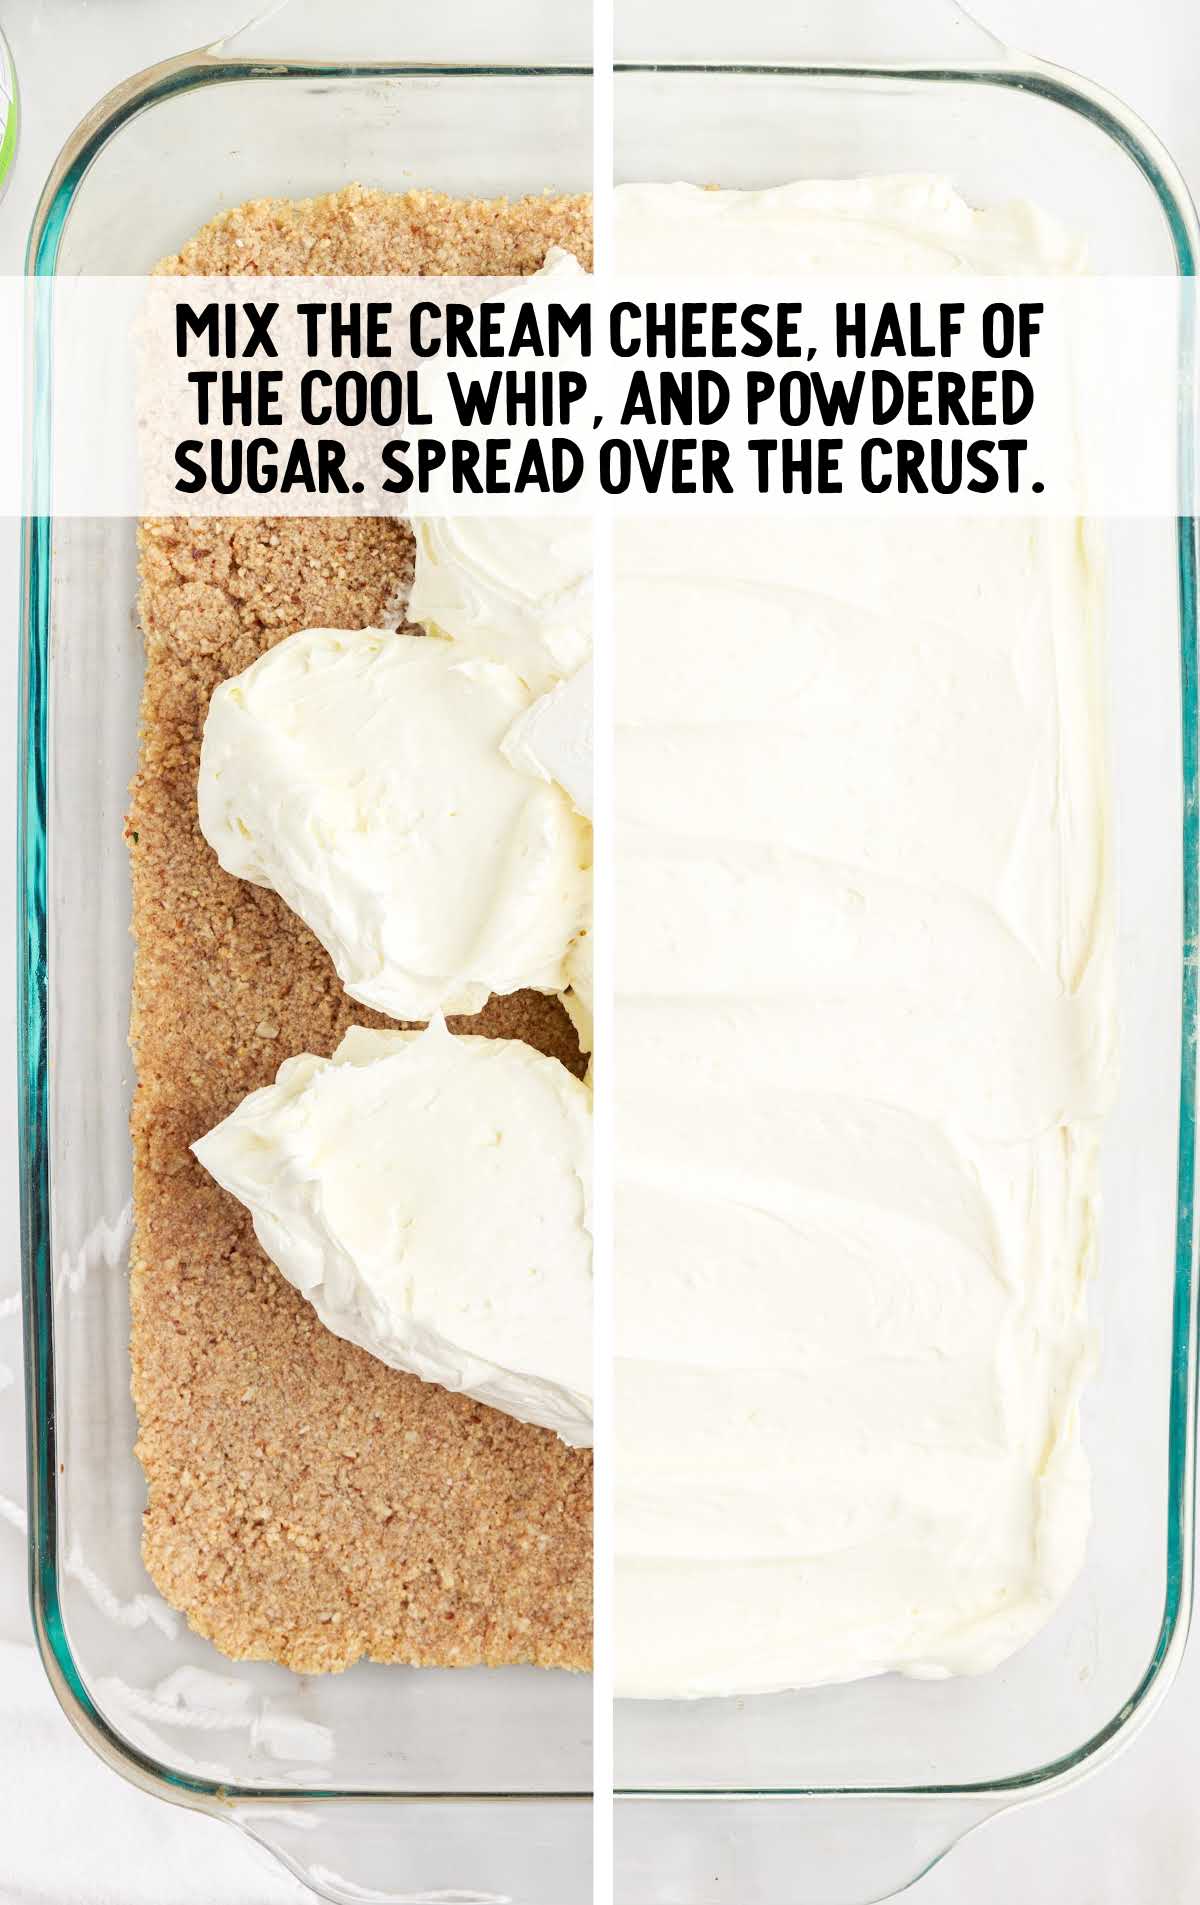 cream cheese, half of cool whip, and powder sugar spread over the crust in a baking dish